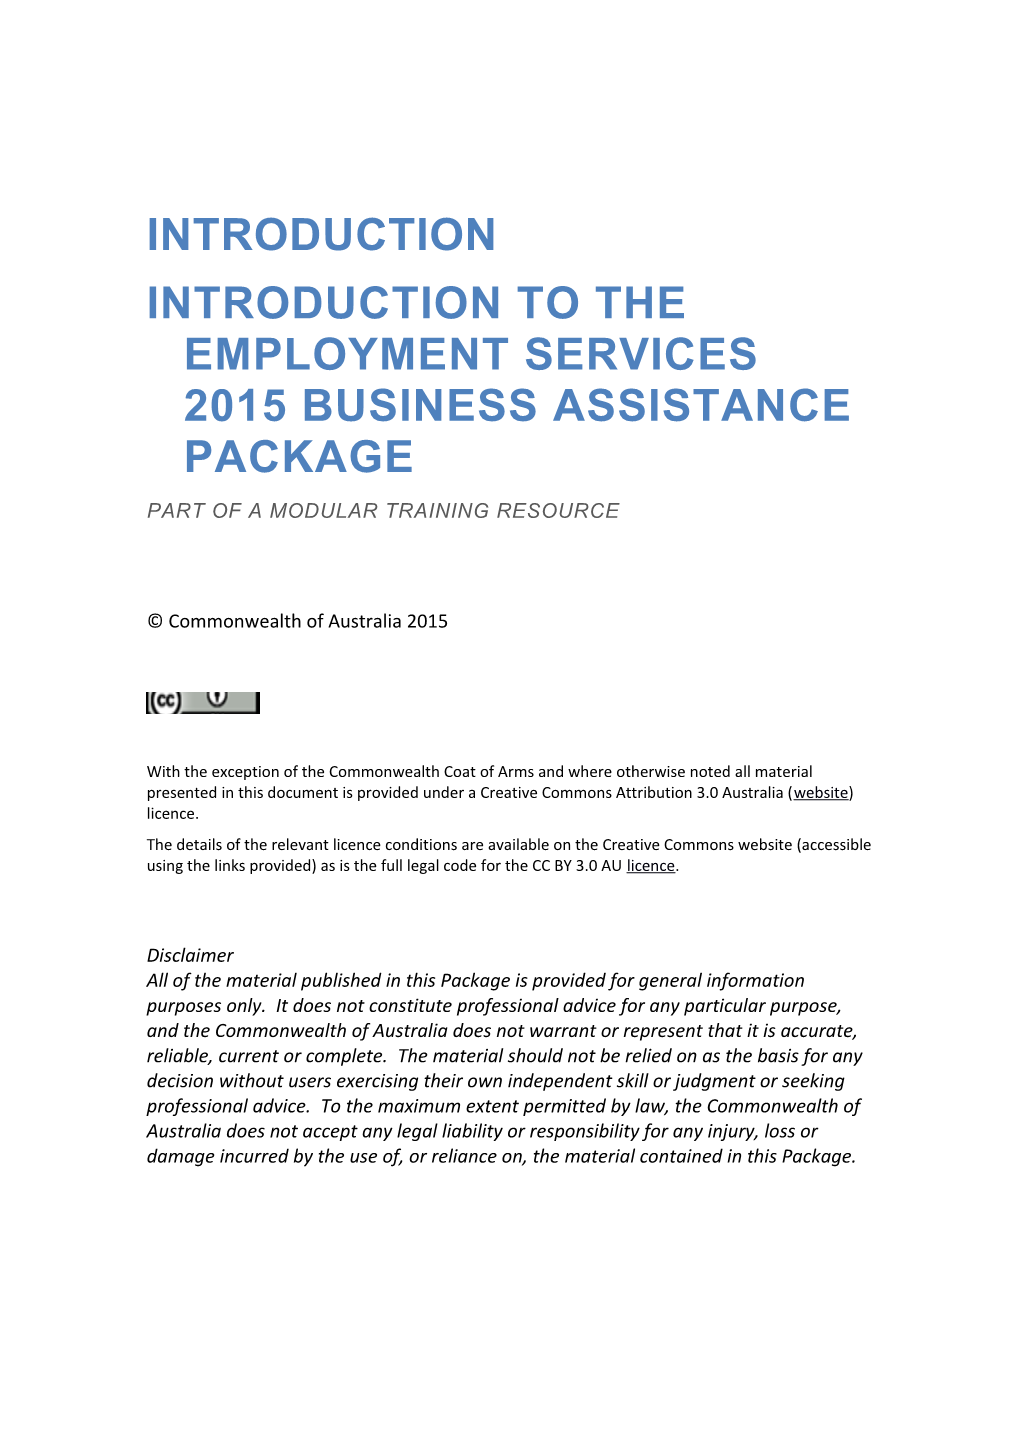 Introduction to the Employment Services 2015Business Assistance Package